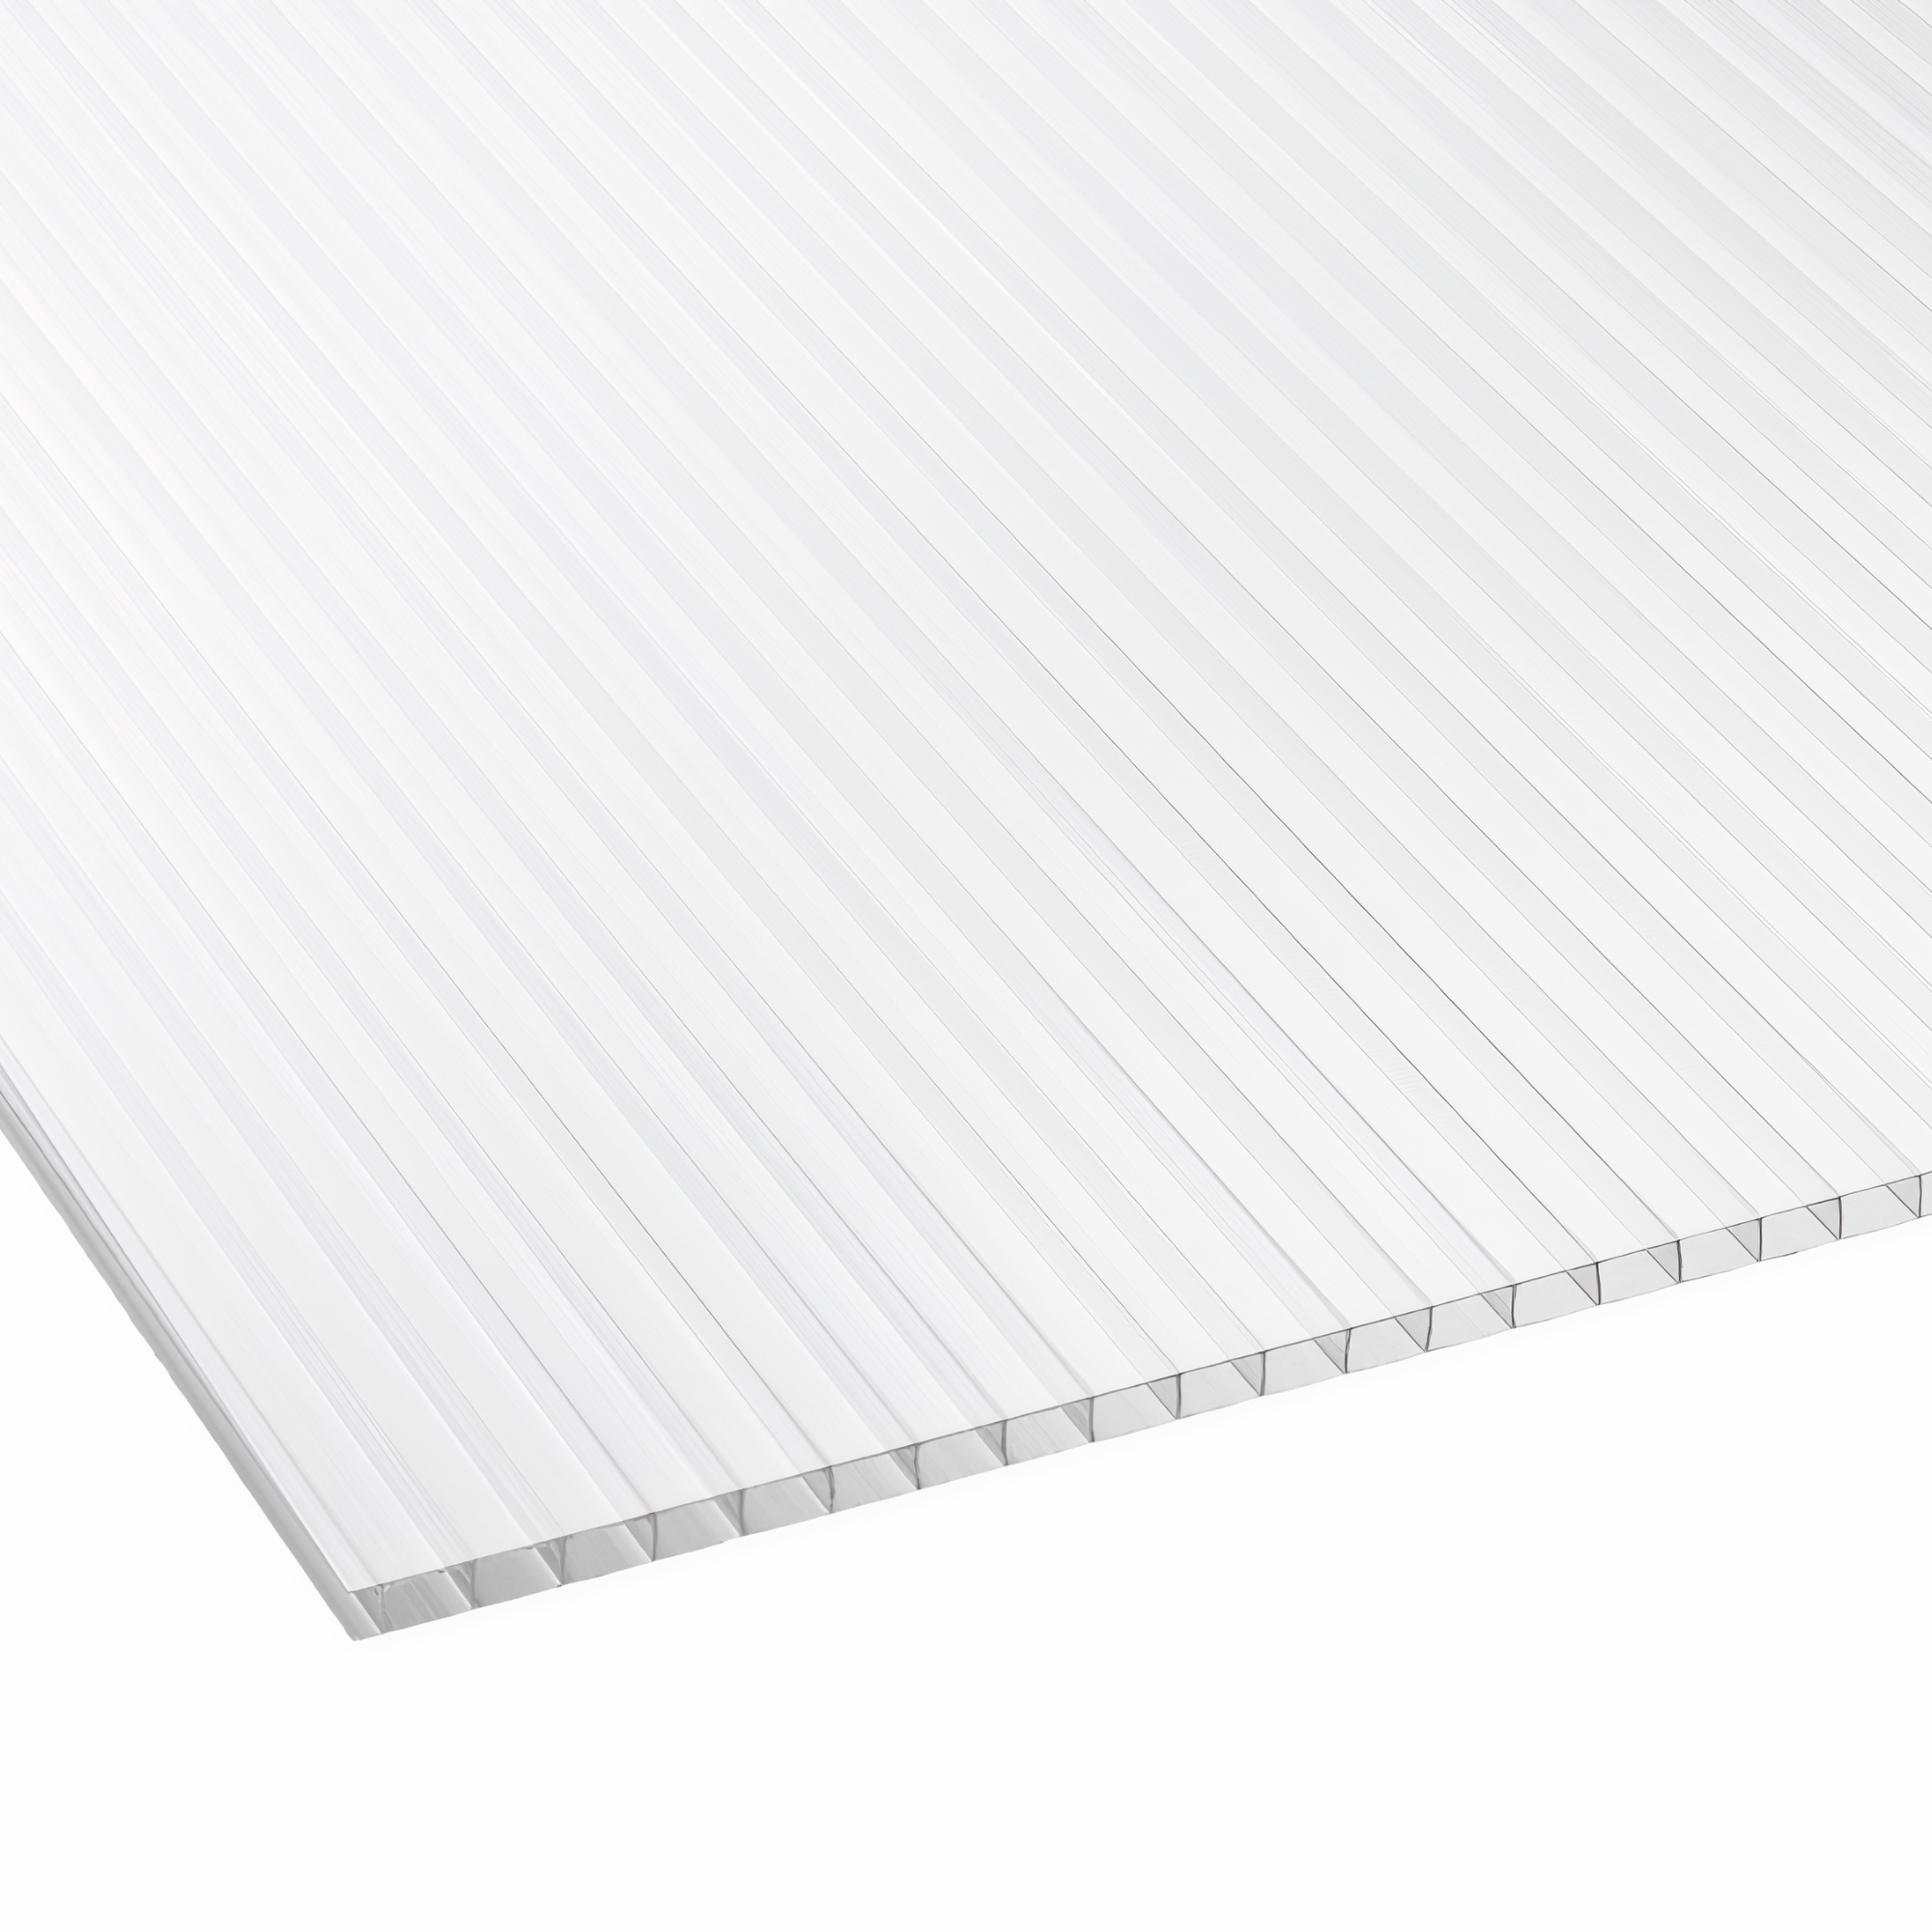 4mm Polycarbonate Sheets - 402mm x 564mm